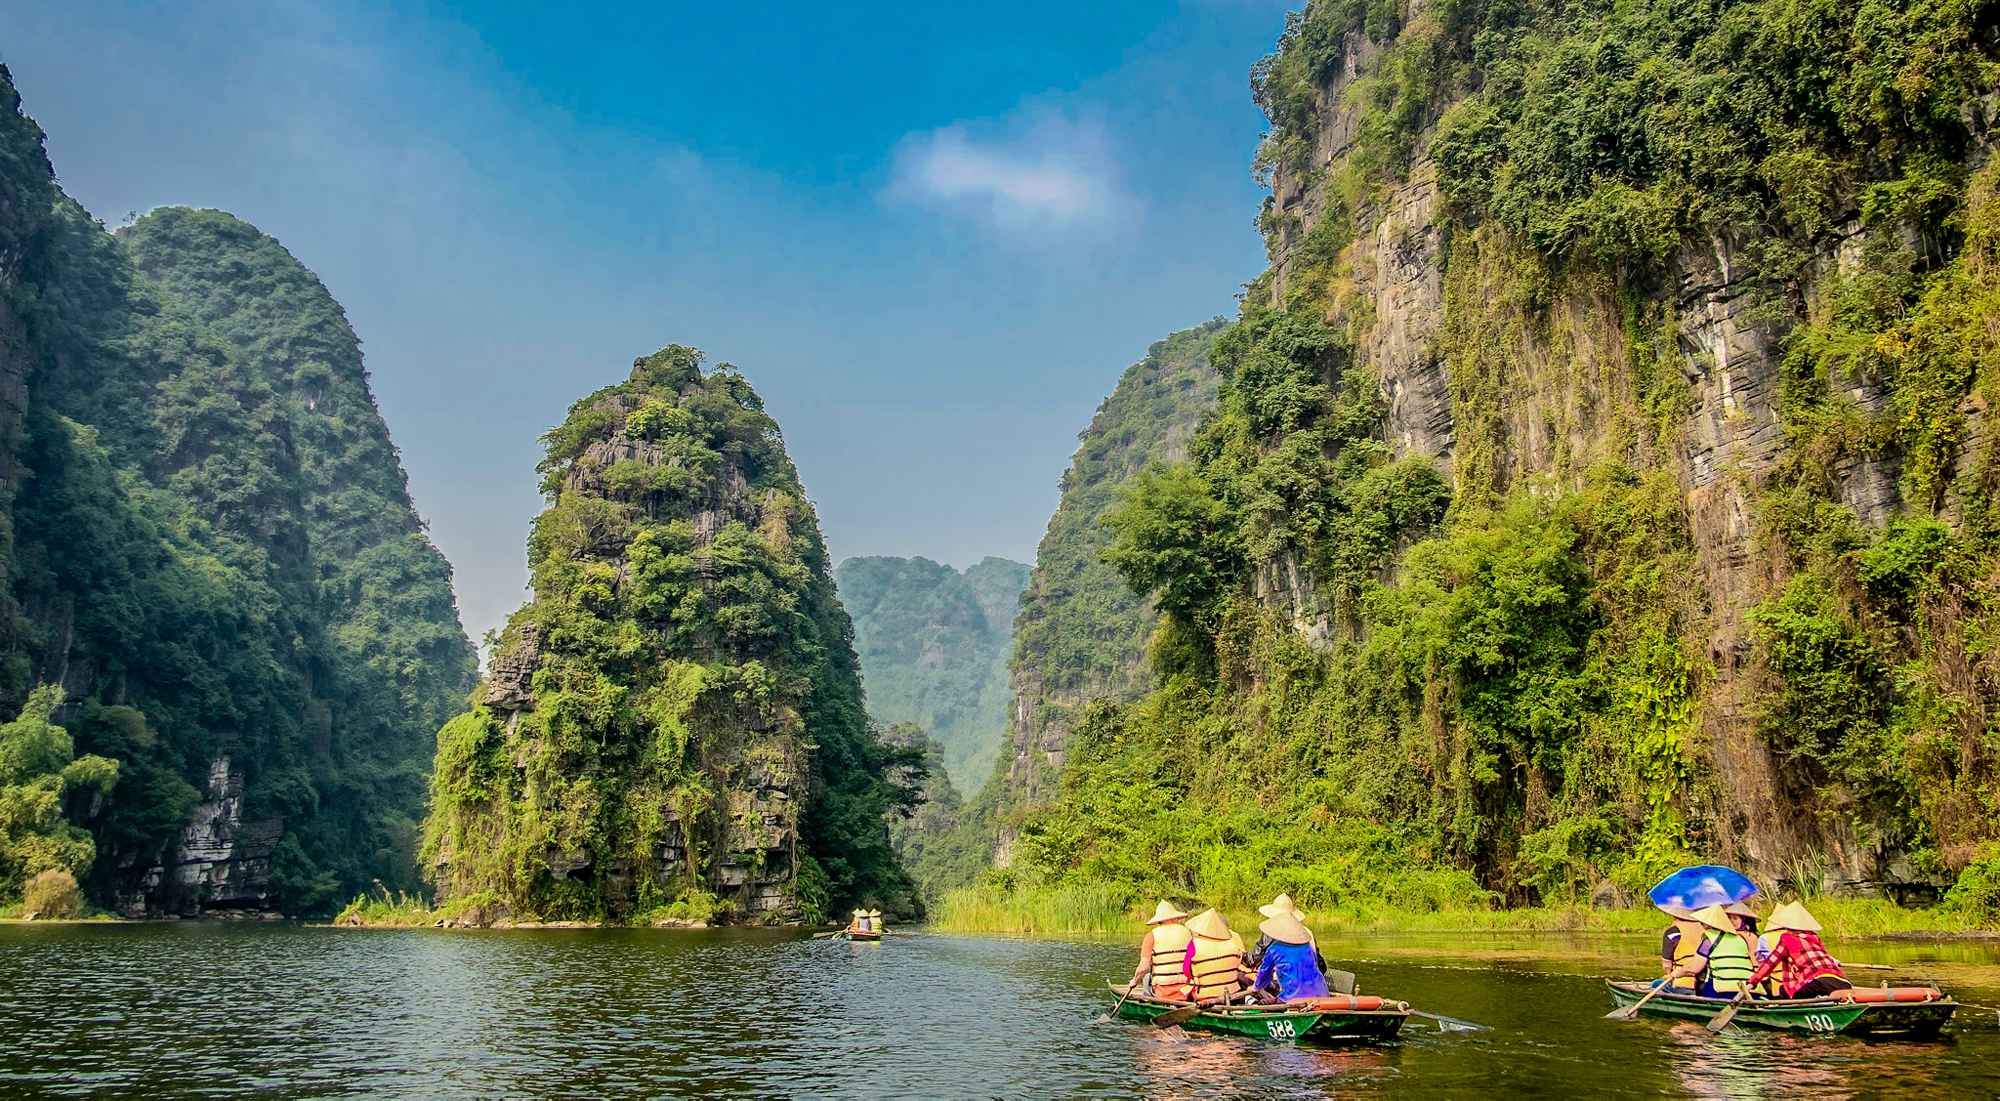 The ideal time to visit Cuc Phuong National Park is in the dry seasons, which runs from October through February because of the pleasant, mild weather.